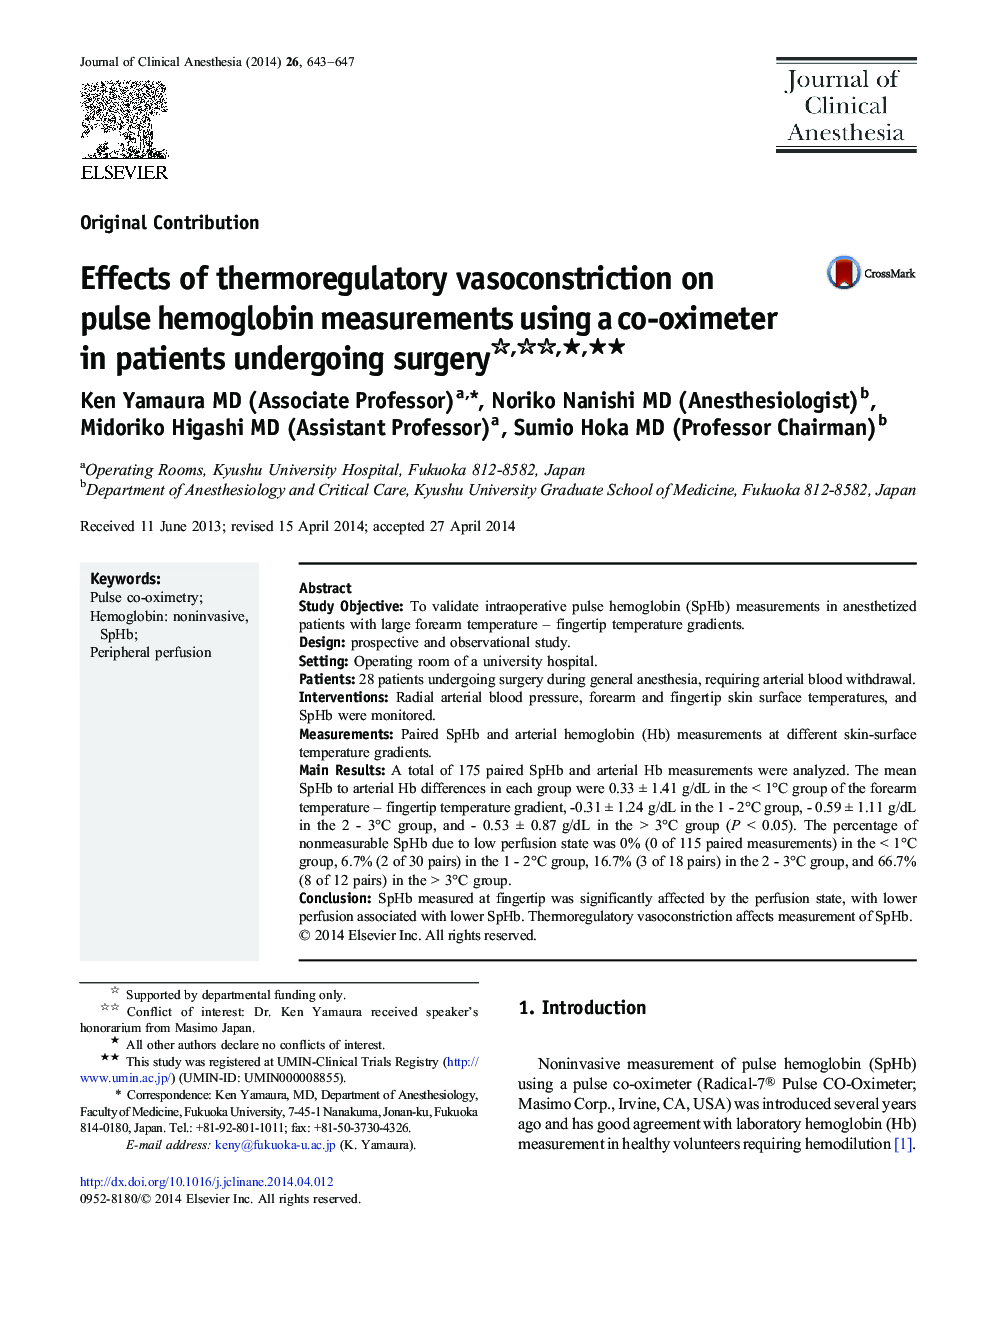 Effects of thermoregulatory vasoconstriction on pulse hemoglobin measurements using a co-oximeter in patients undergoing surgery ★★★